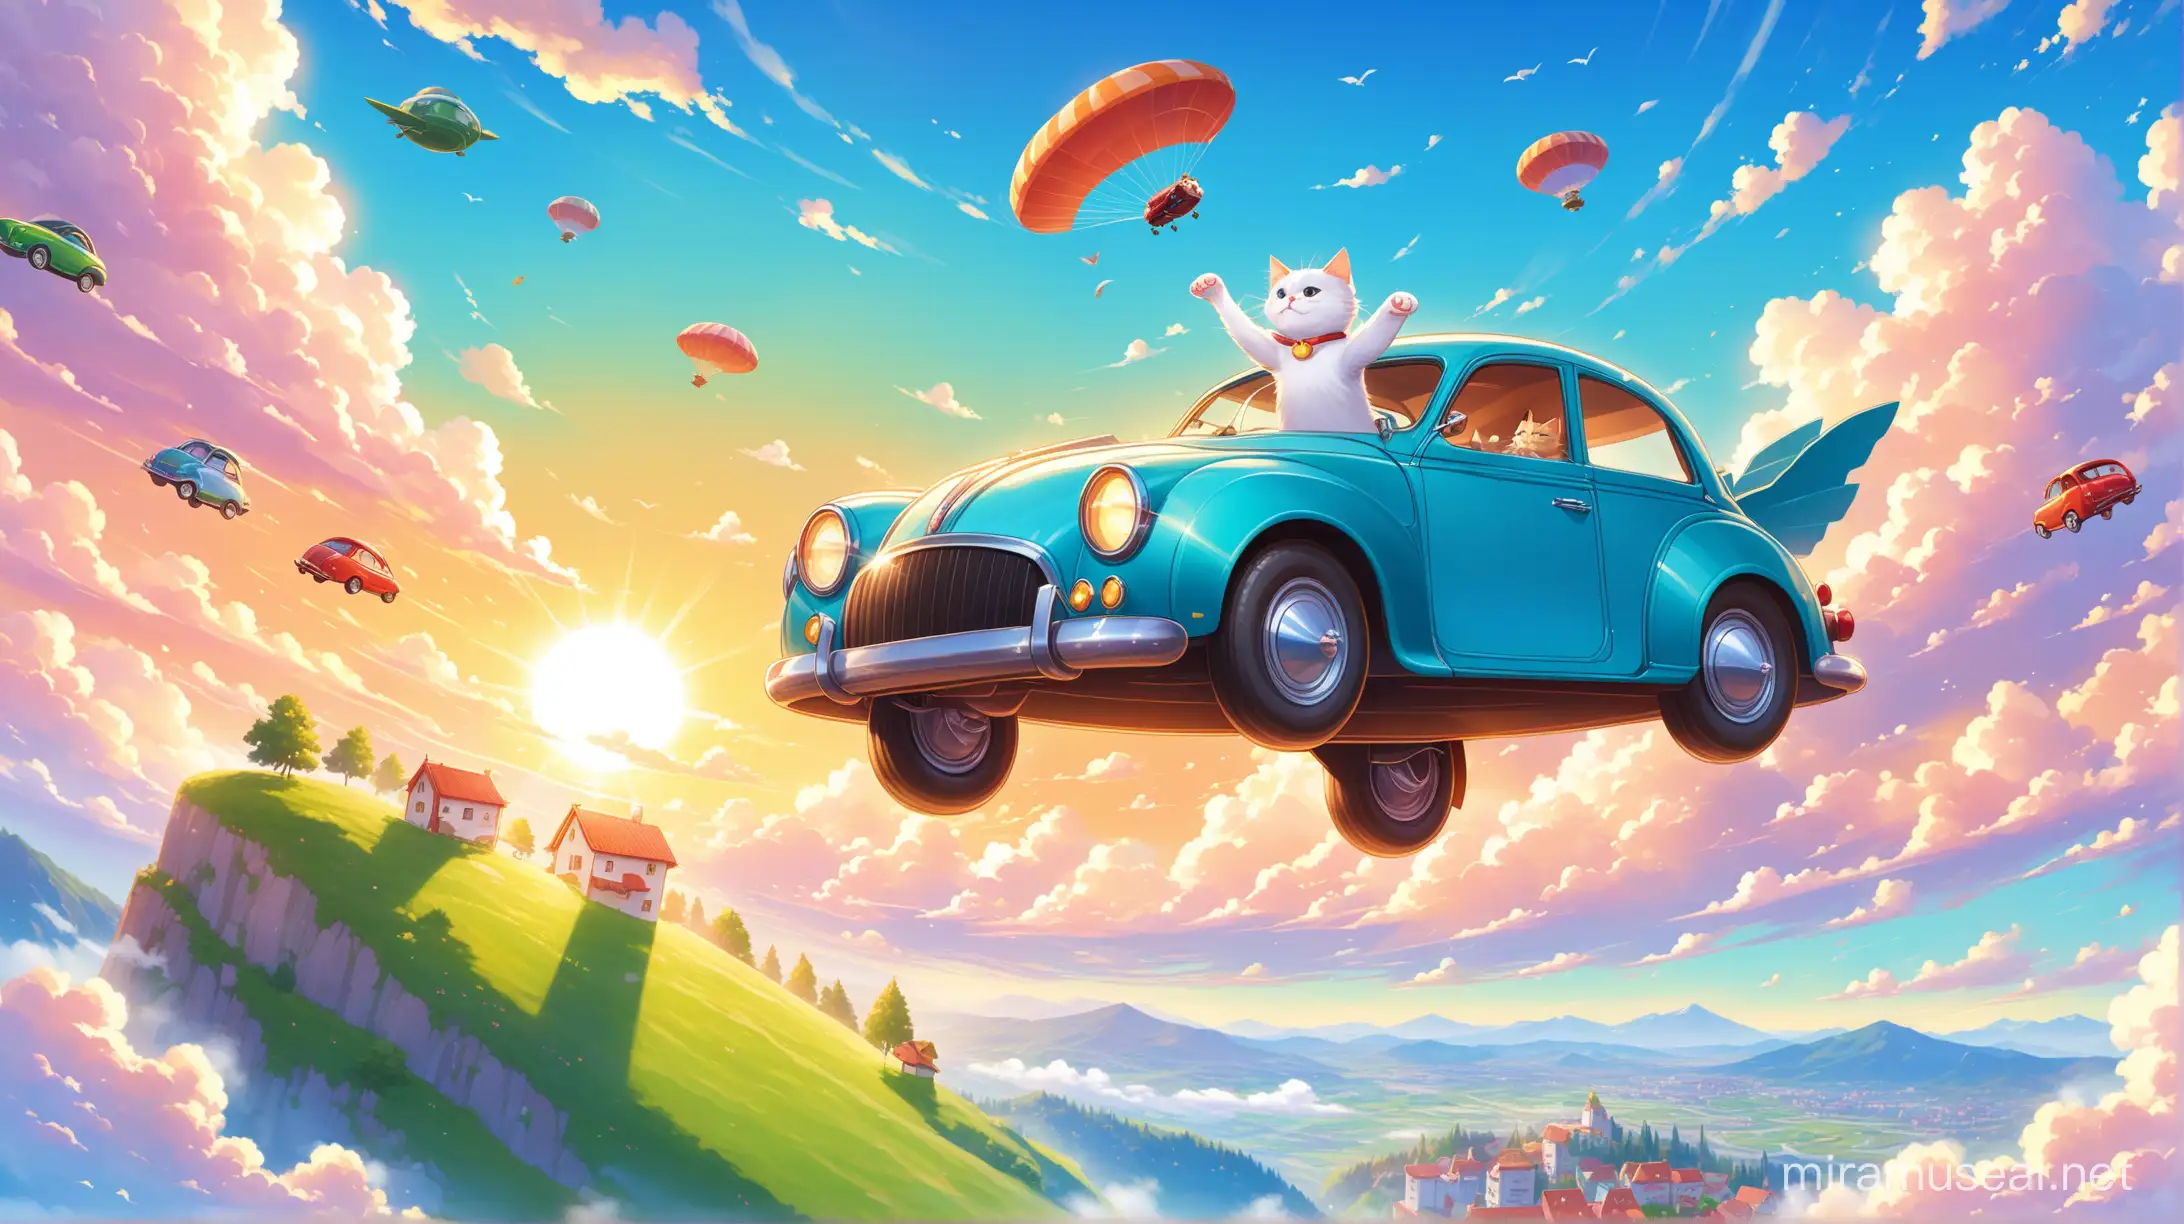 Joyful Cat Dancing in Sunny Skies with Flying Food and Cars